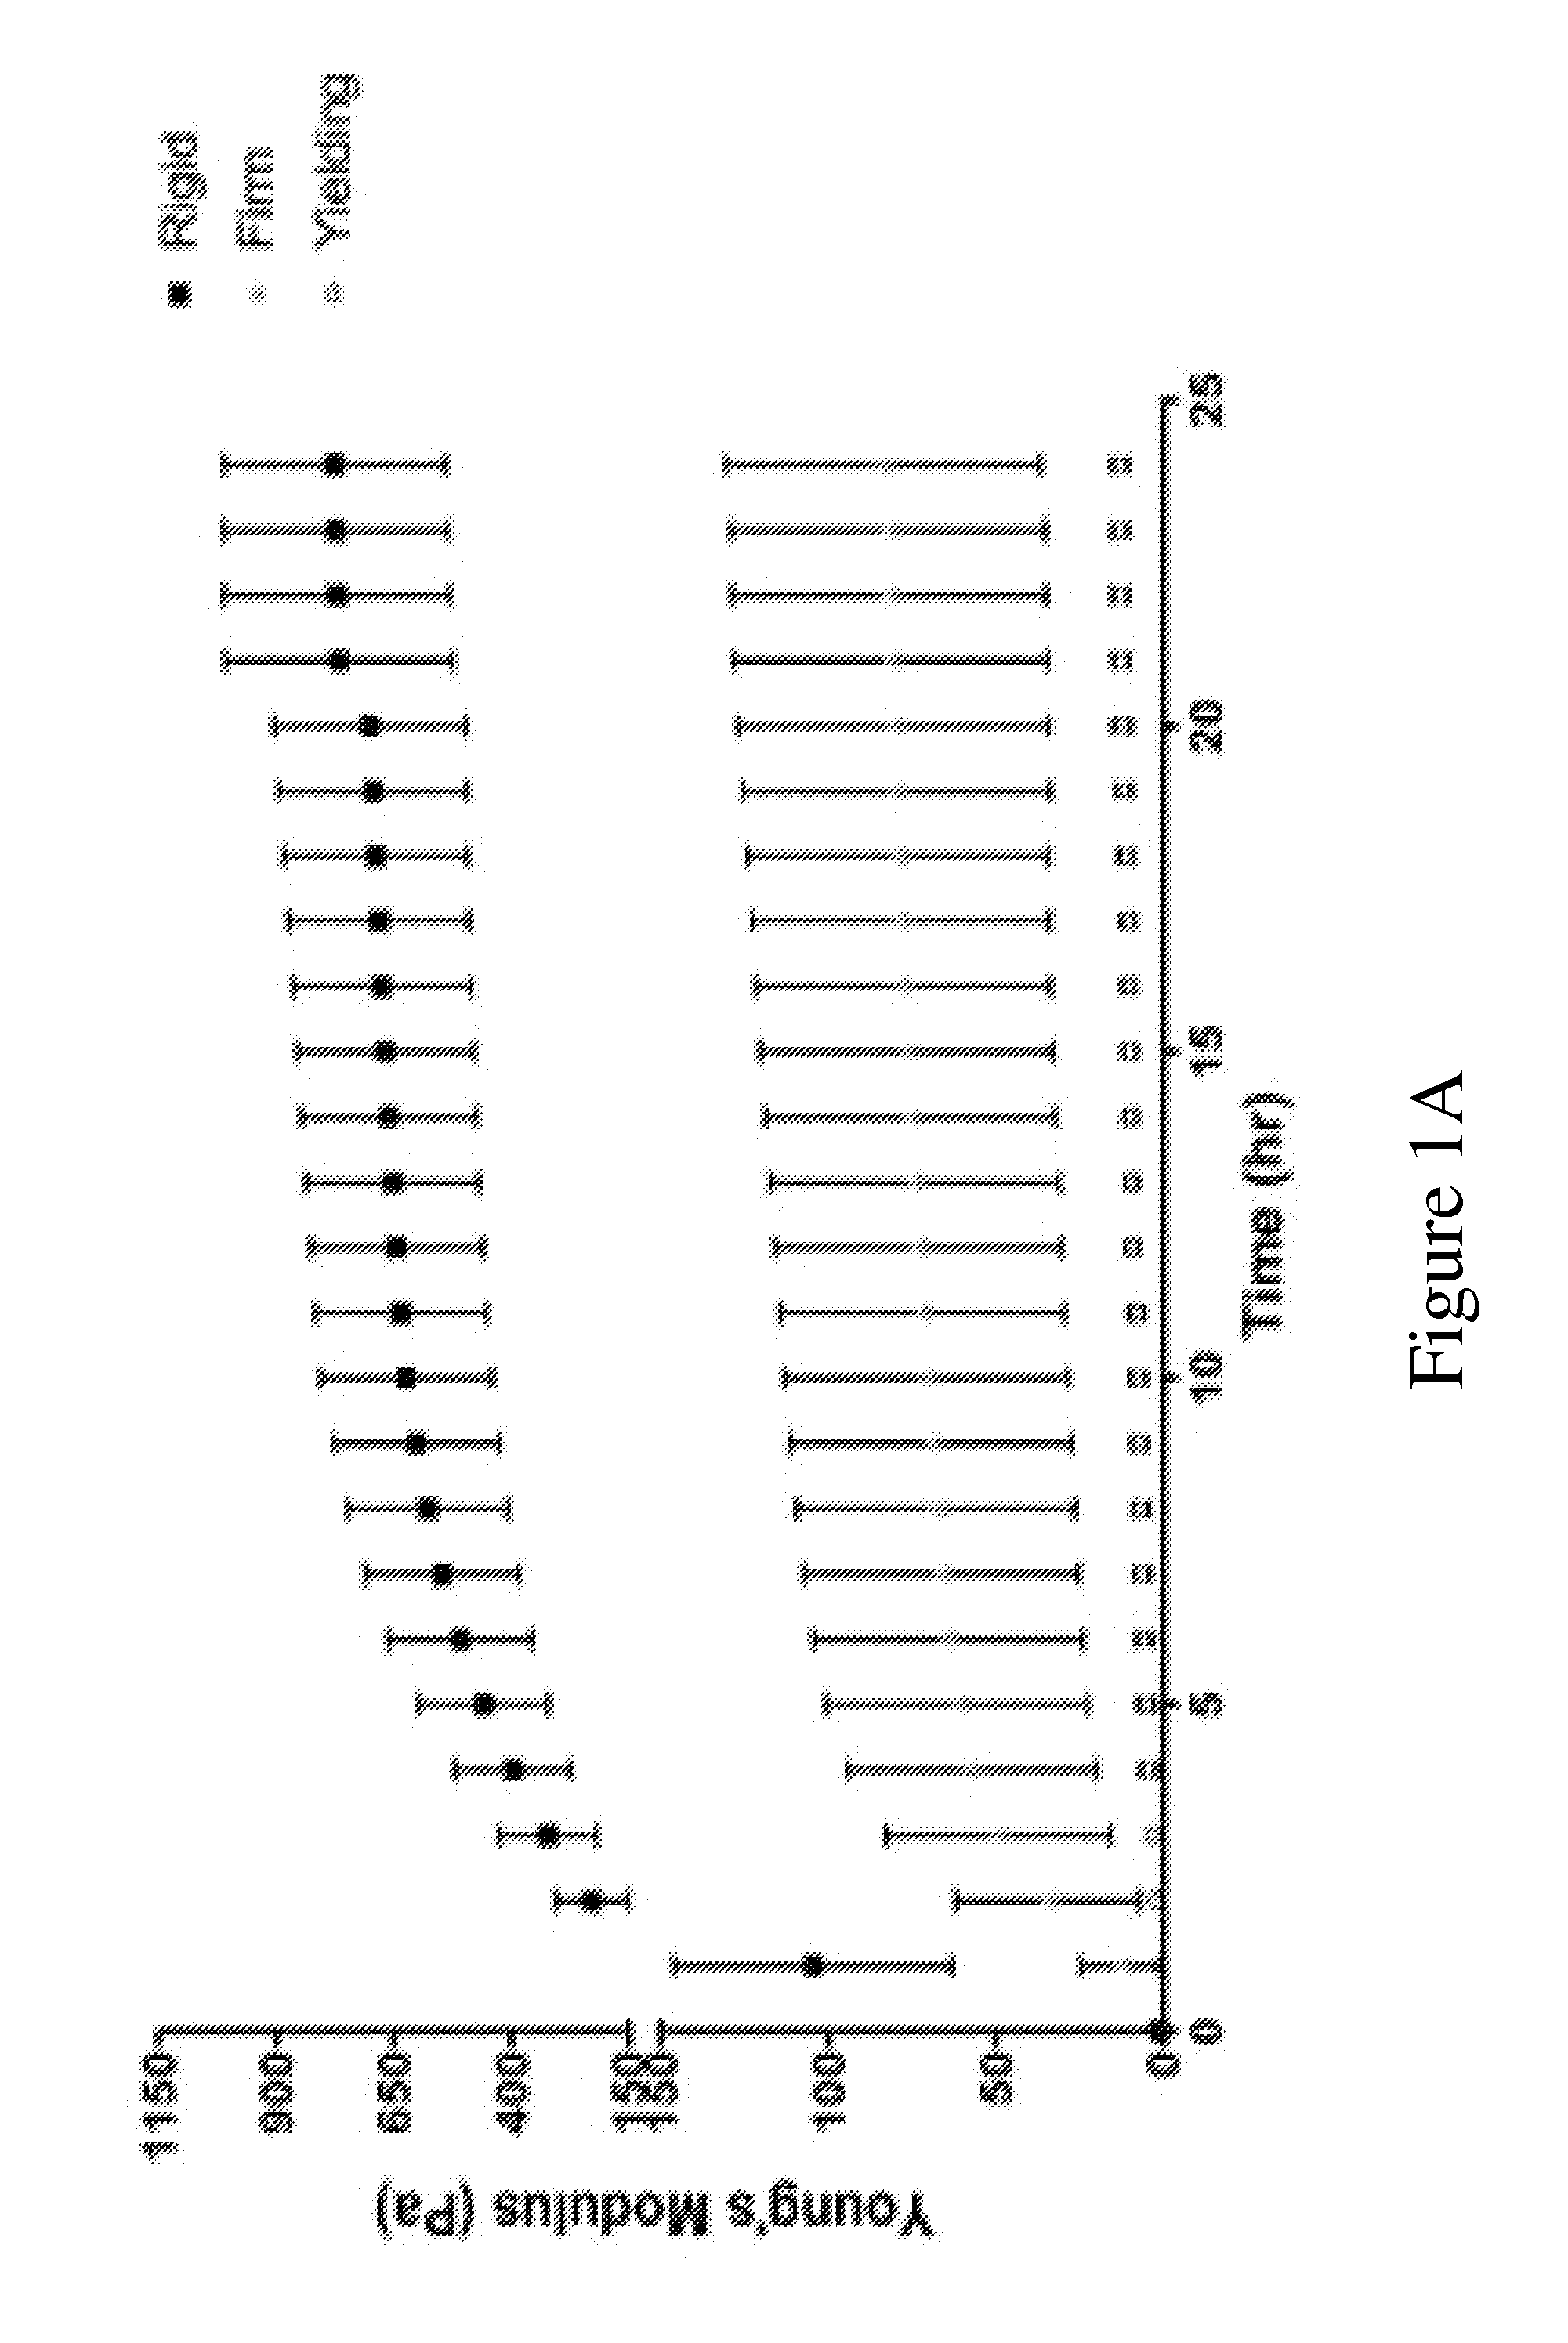 Hydrogel-based vascular lineage cell growth media and uses thereof